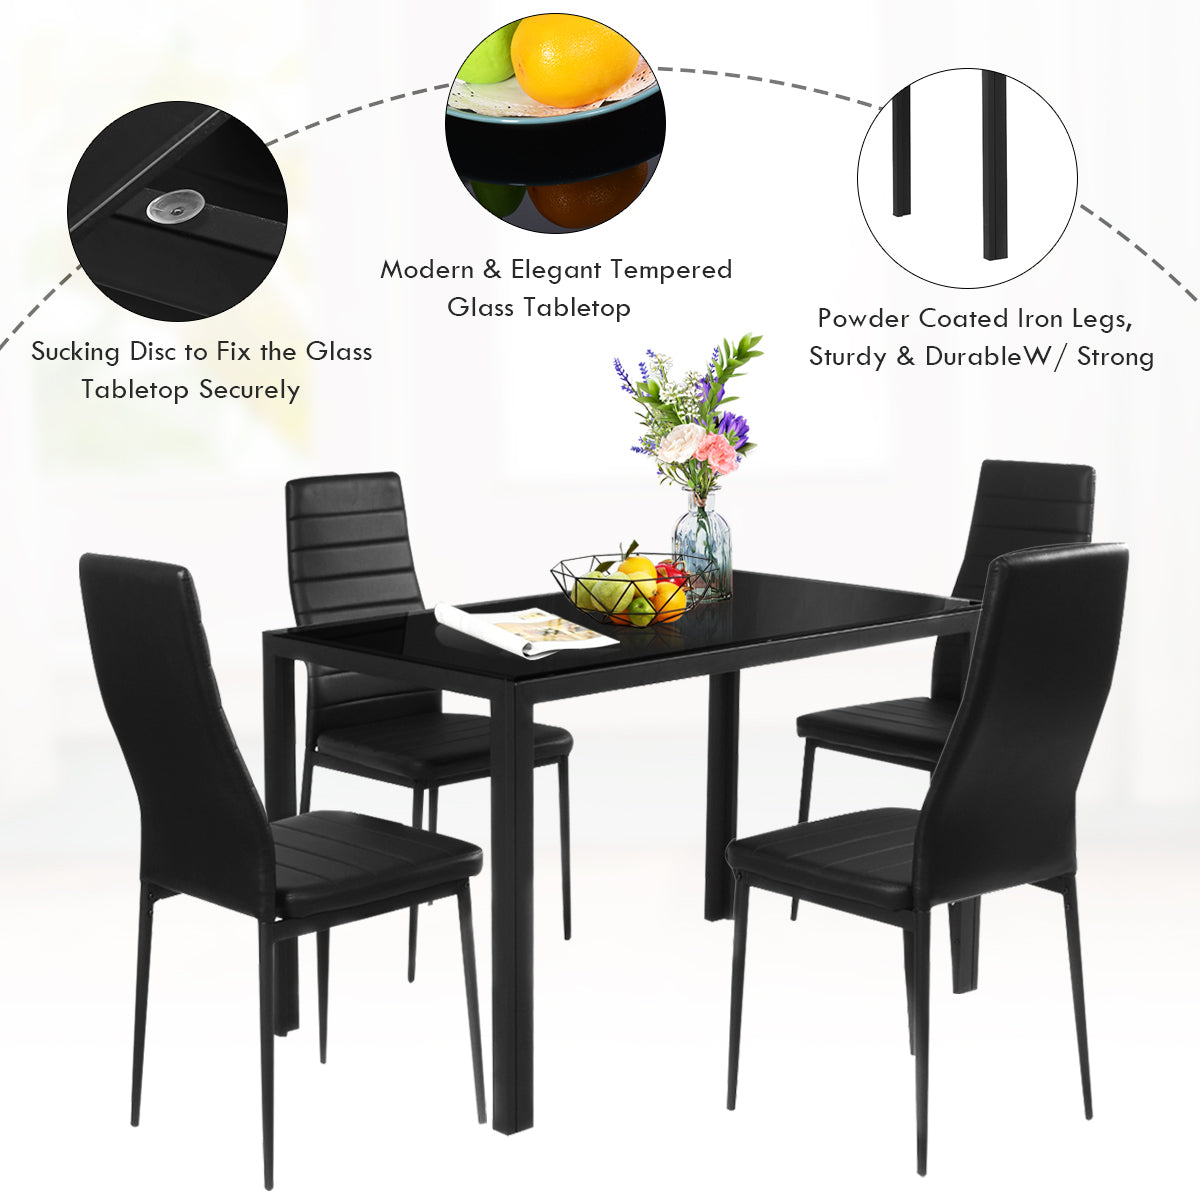 5 Piece Kitchen Dining Table Set with Glass Table Top Leather Padded 4 Chairs (Black) - Giantexus